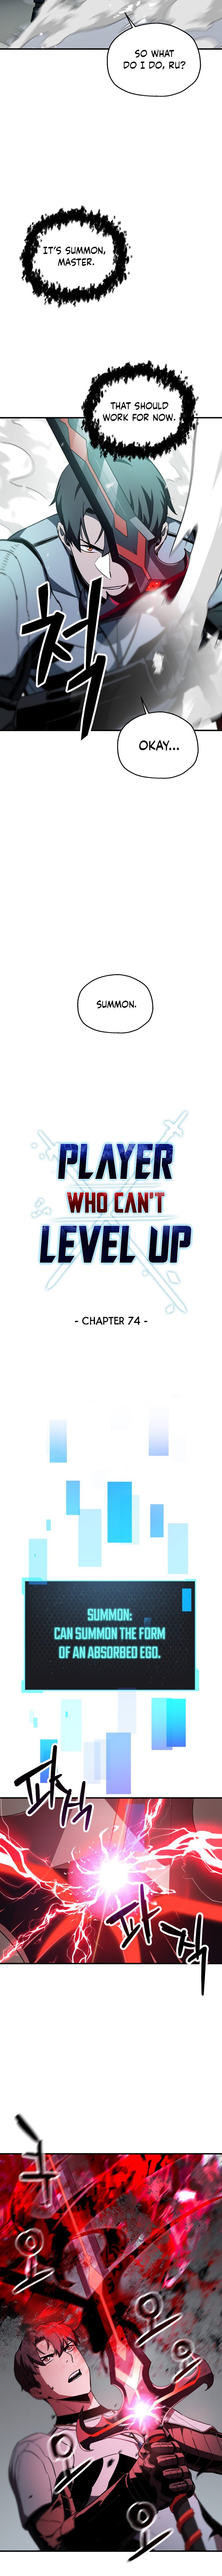 the-player-that-cant-level-up-chap-74-9